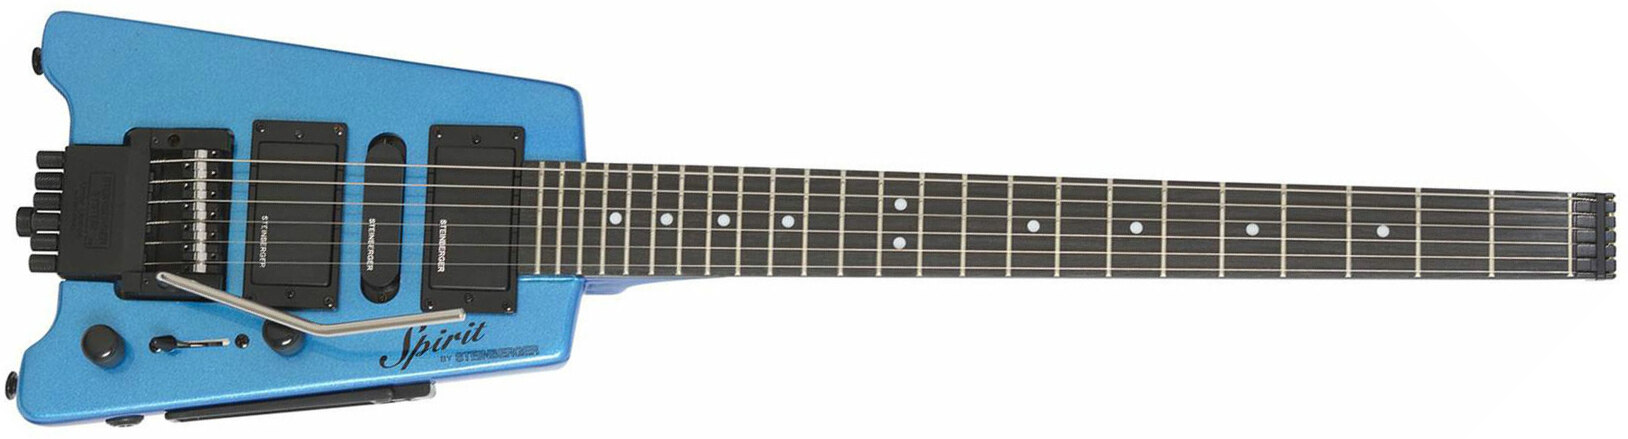 Steinberger Gt-pro Deluxe Outfit Hsh Trem Rw +housse - Frost Blue - Travel & mini electric guitar - Main picture